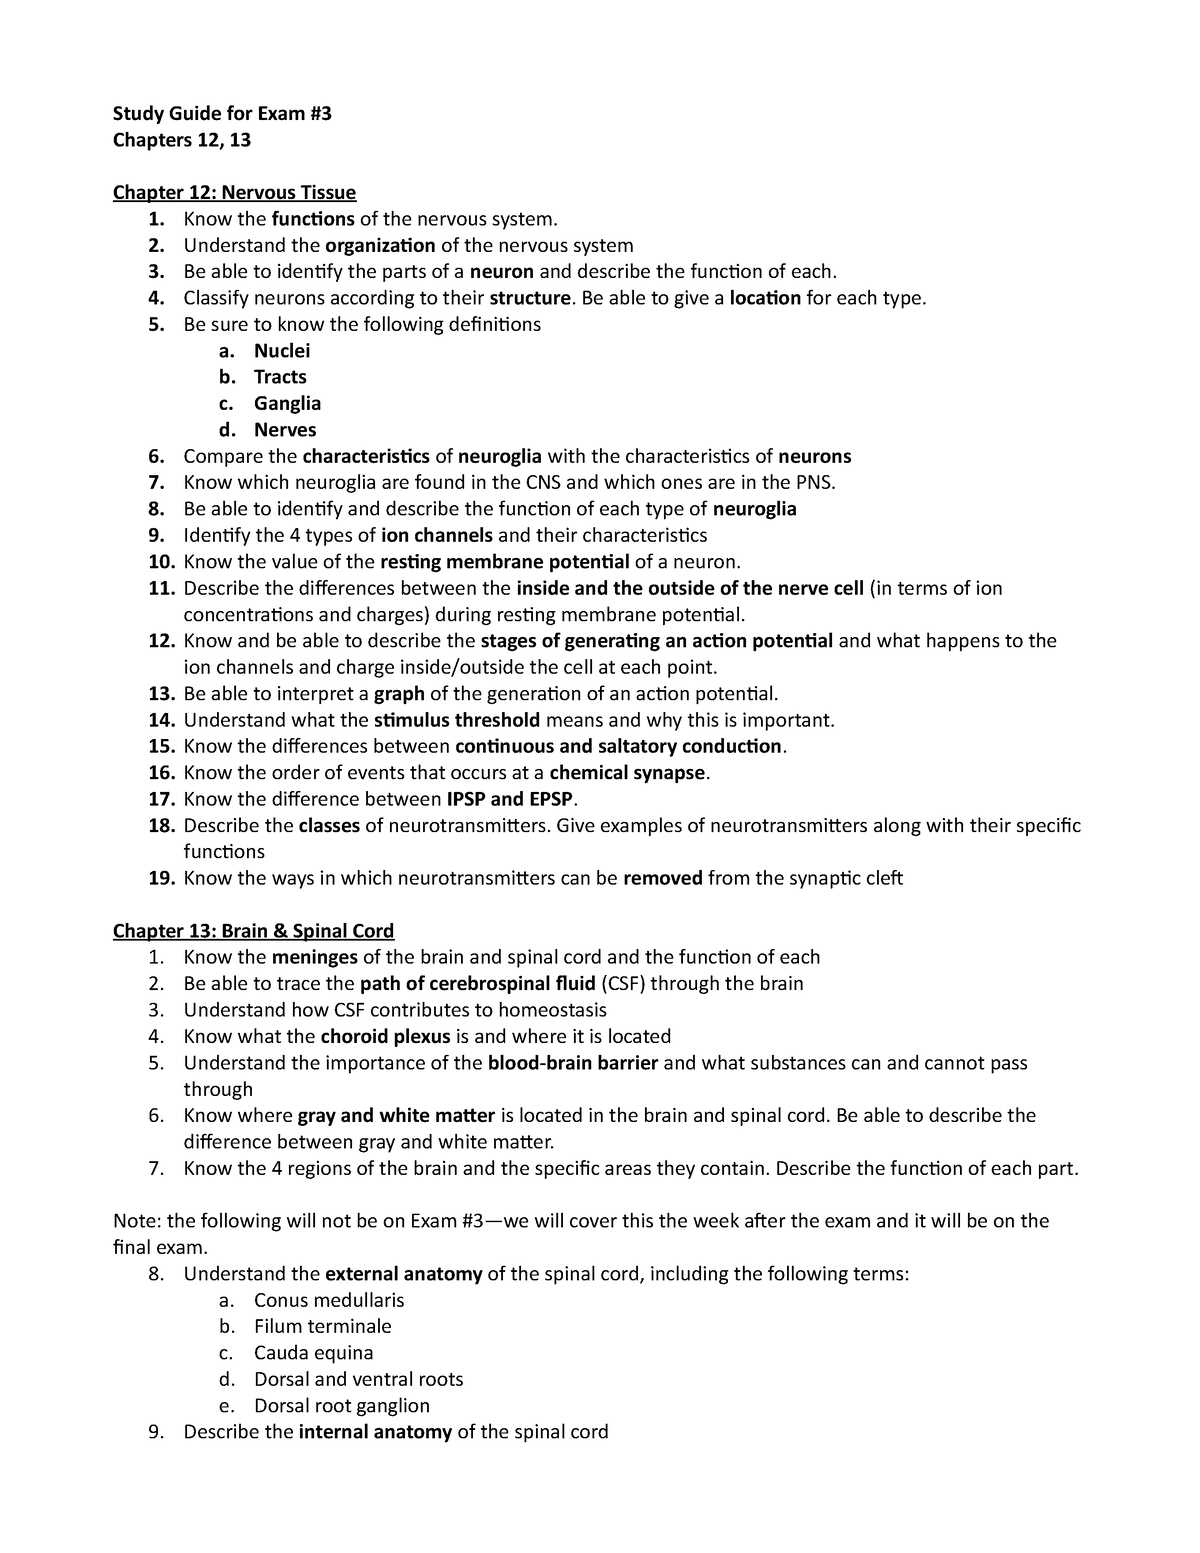 assignment 3 1 study guide questions